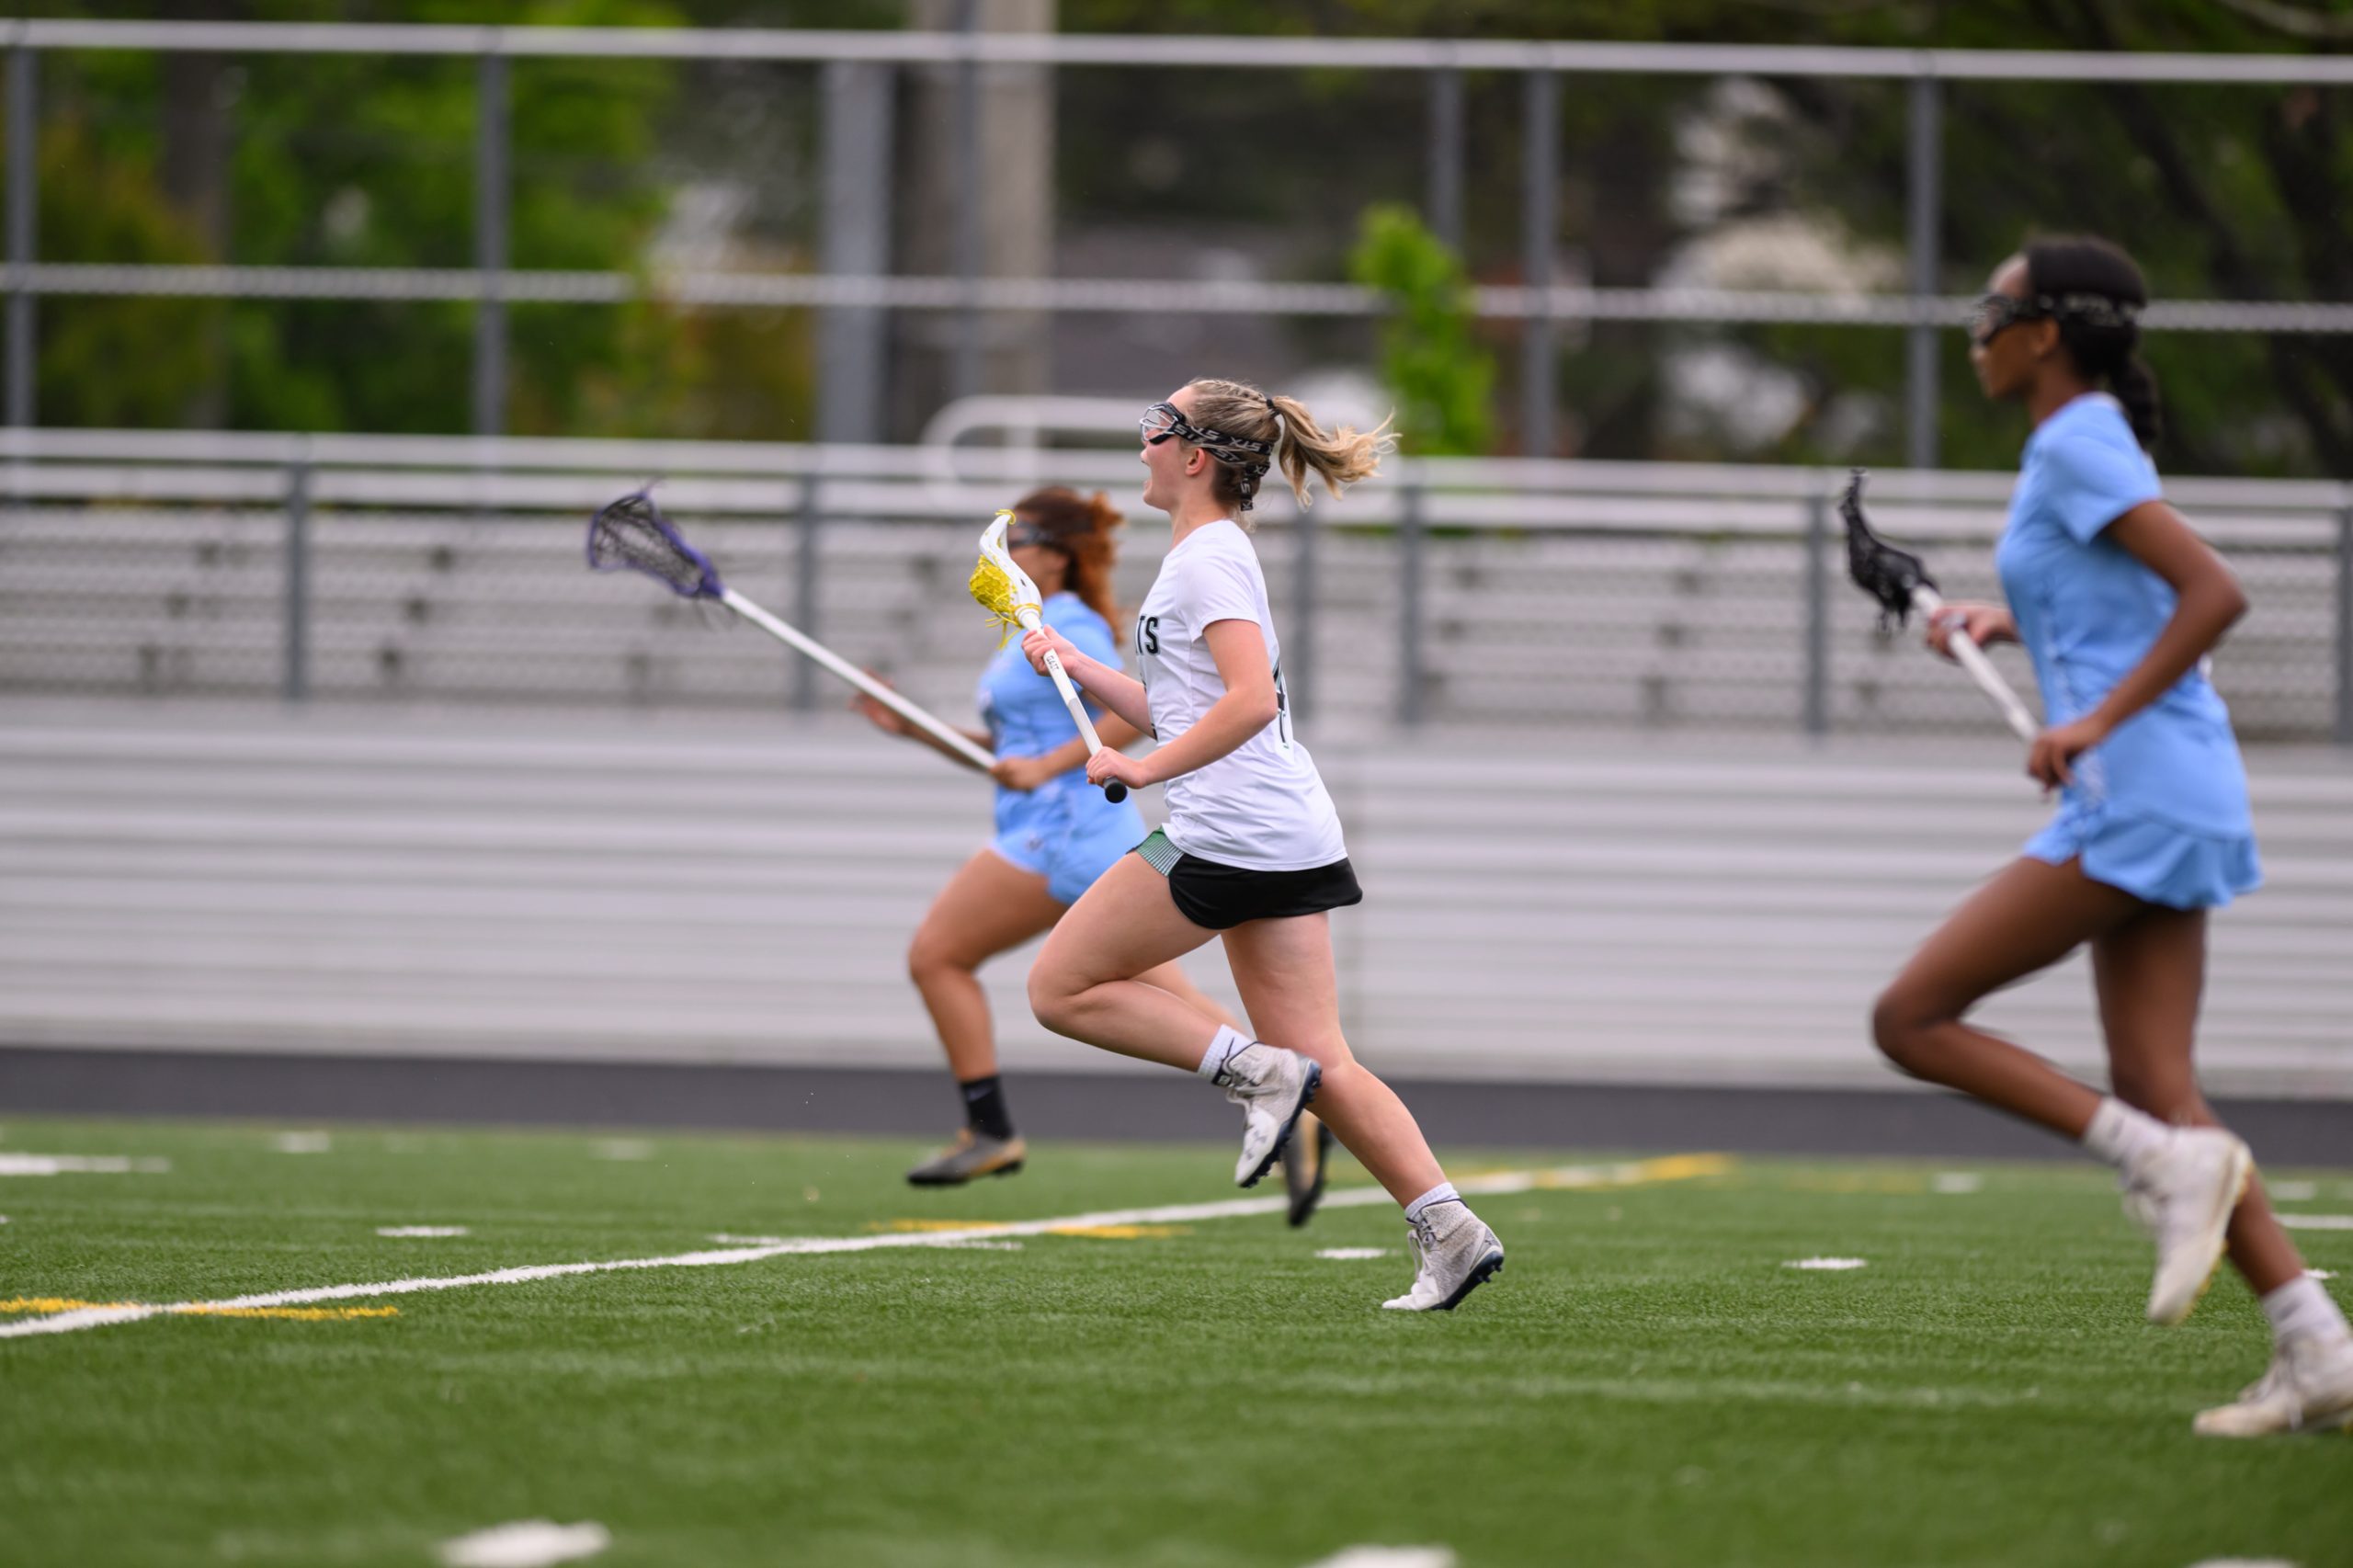 Junior Ginger Fishberg runs up the field during the Cats senior night game for the 2023 season. The Wildcats dominated Springbrook HS 14-1 in that game, and look to replicate similar scorelines this season. (Courtesy Kevin Choi via Lifetouch)